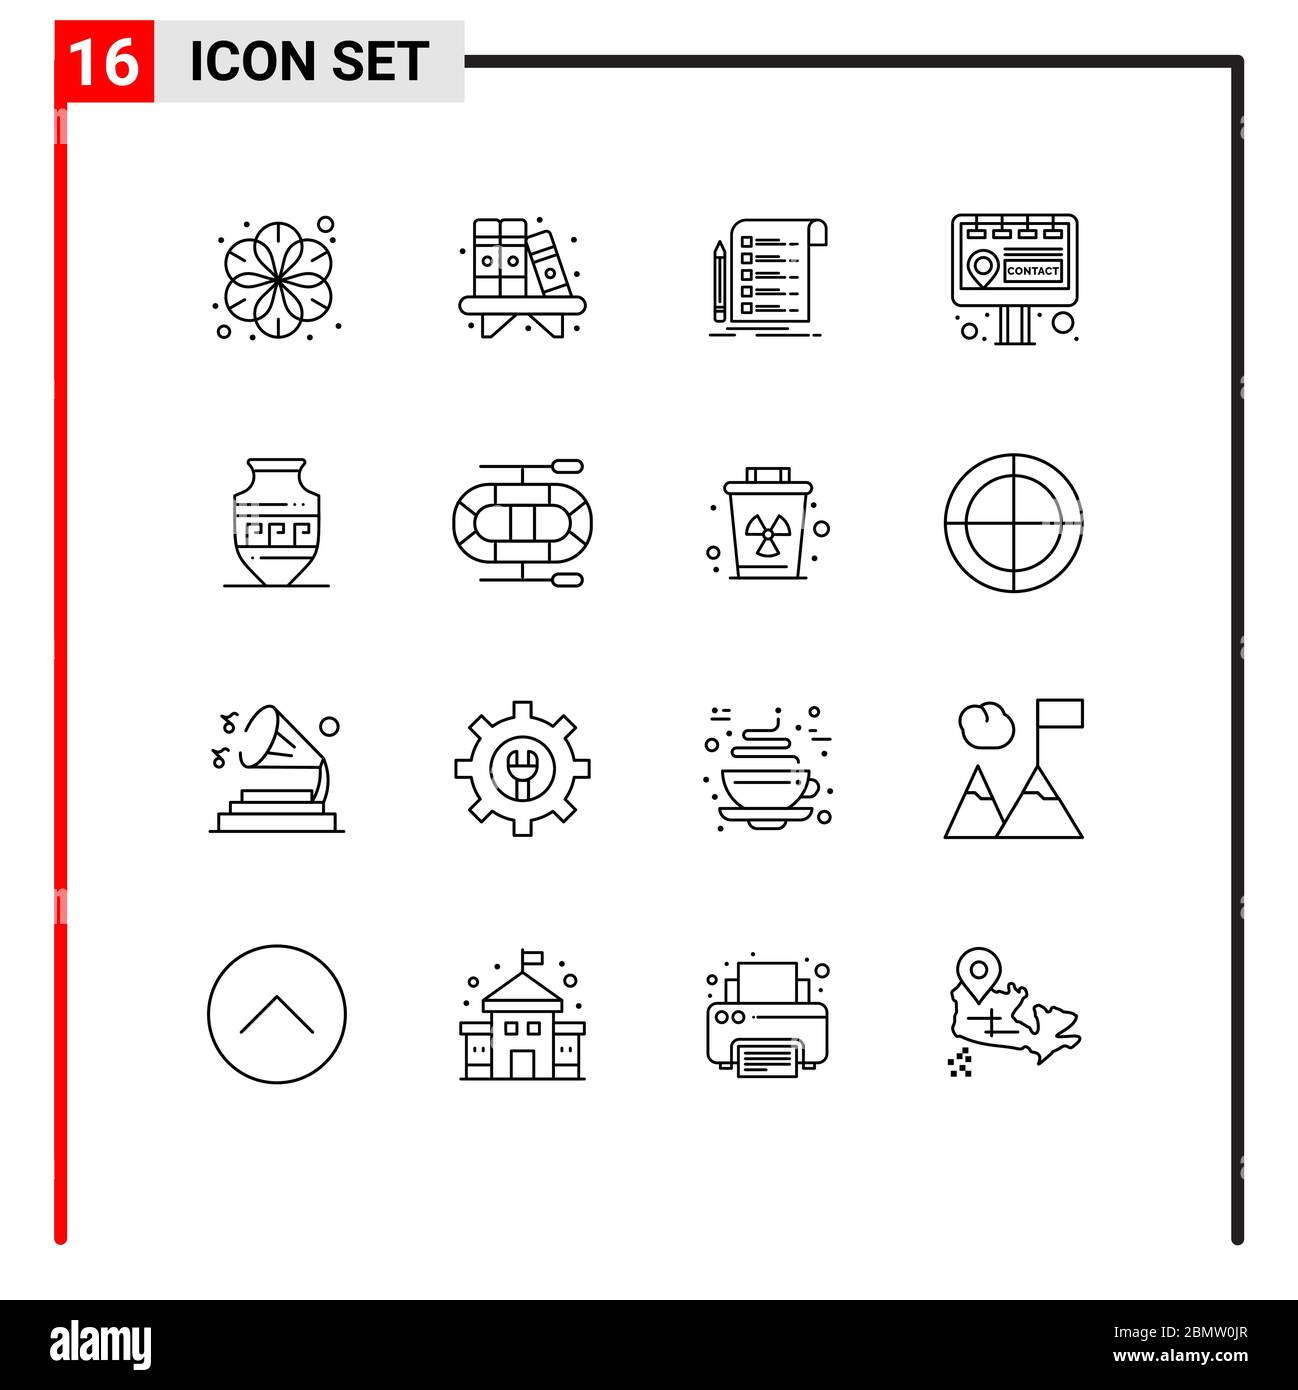 16 User Interface Outline Pack of modern Signs and Symbols of ancient jar, marketing, file, contact, checklist Editable Vector Design Elements Stock Vector